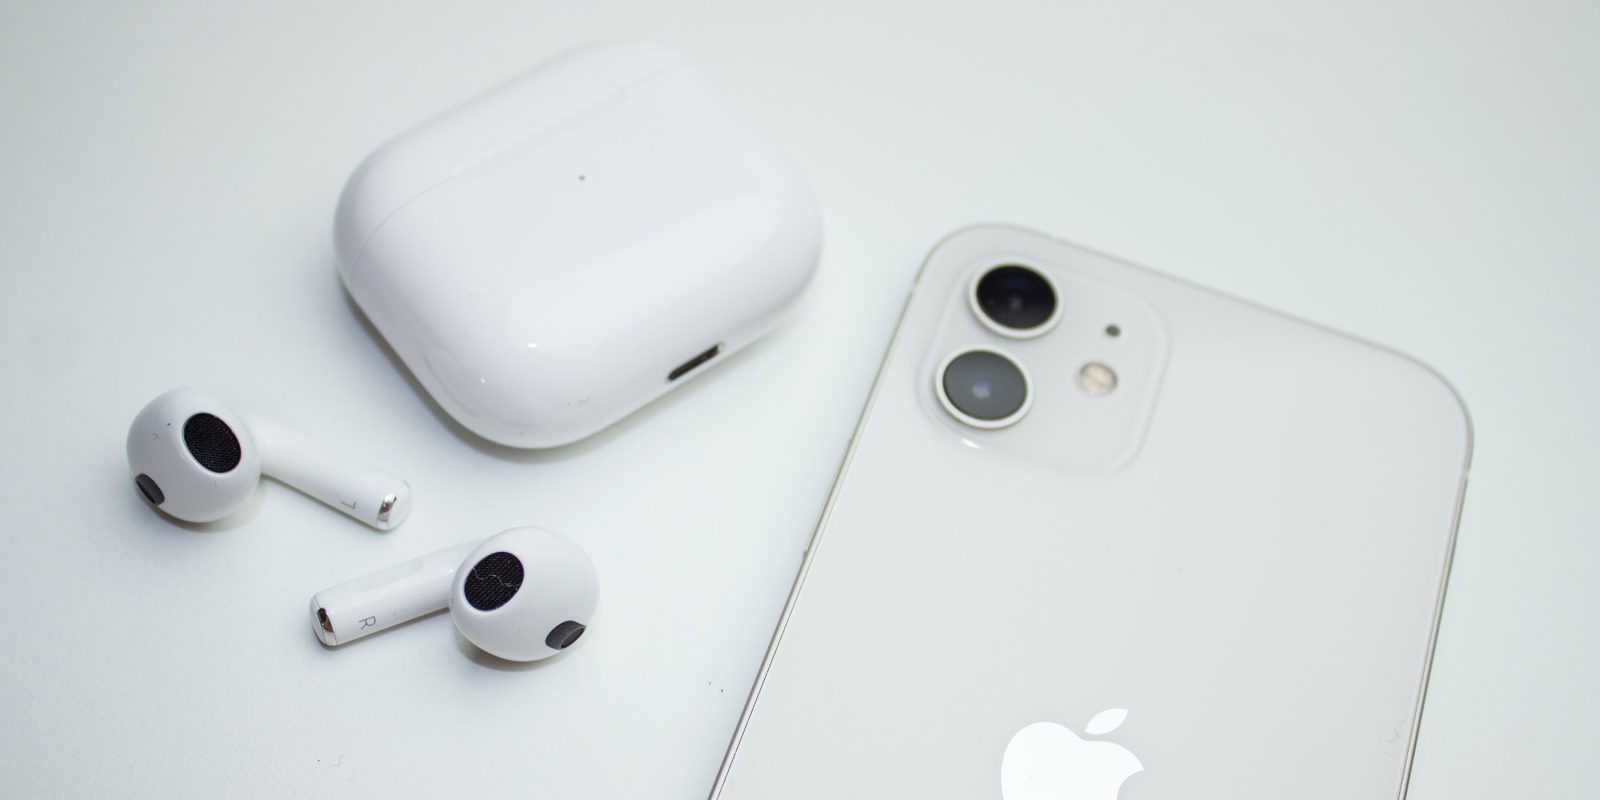 AirPods shipments fell by a third in Q2